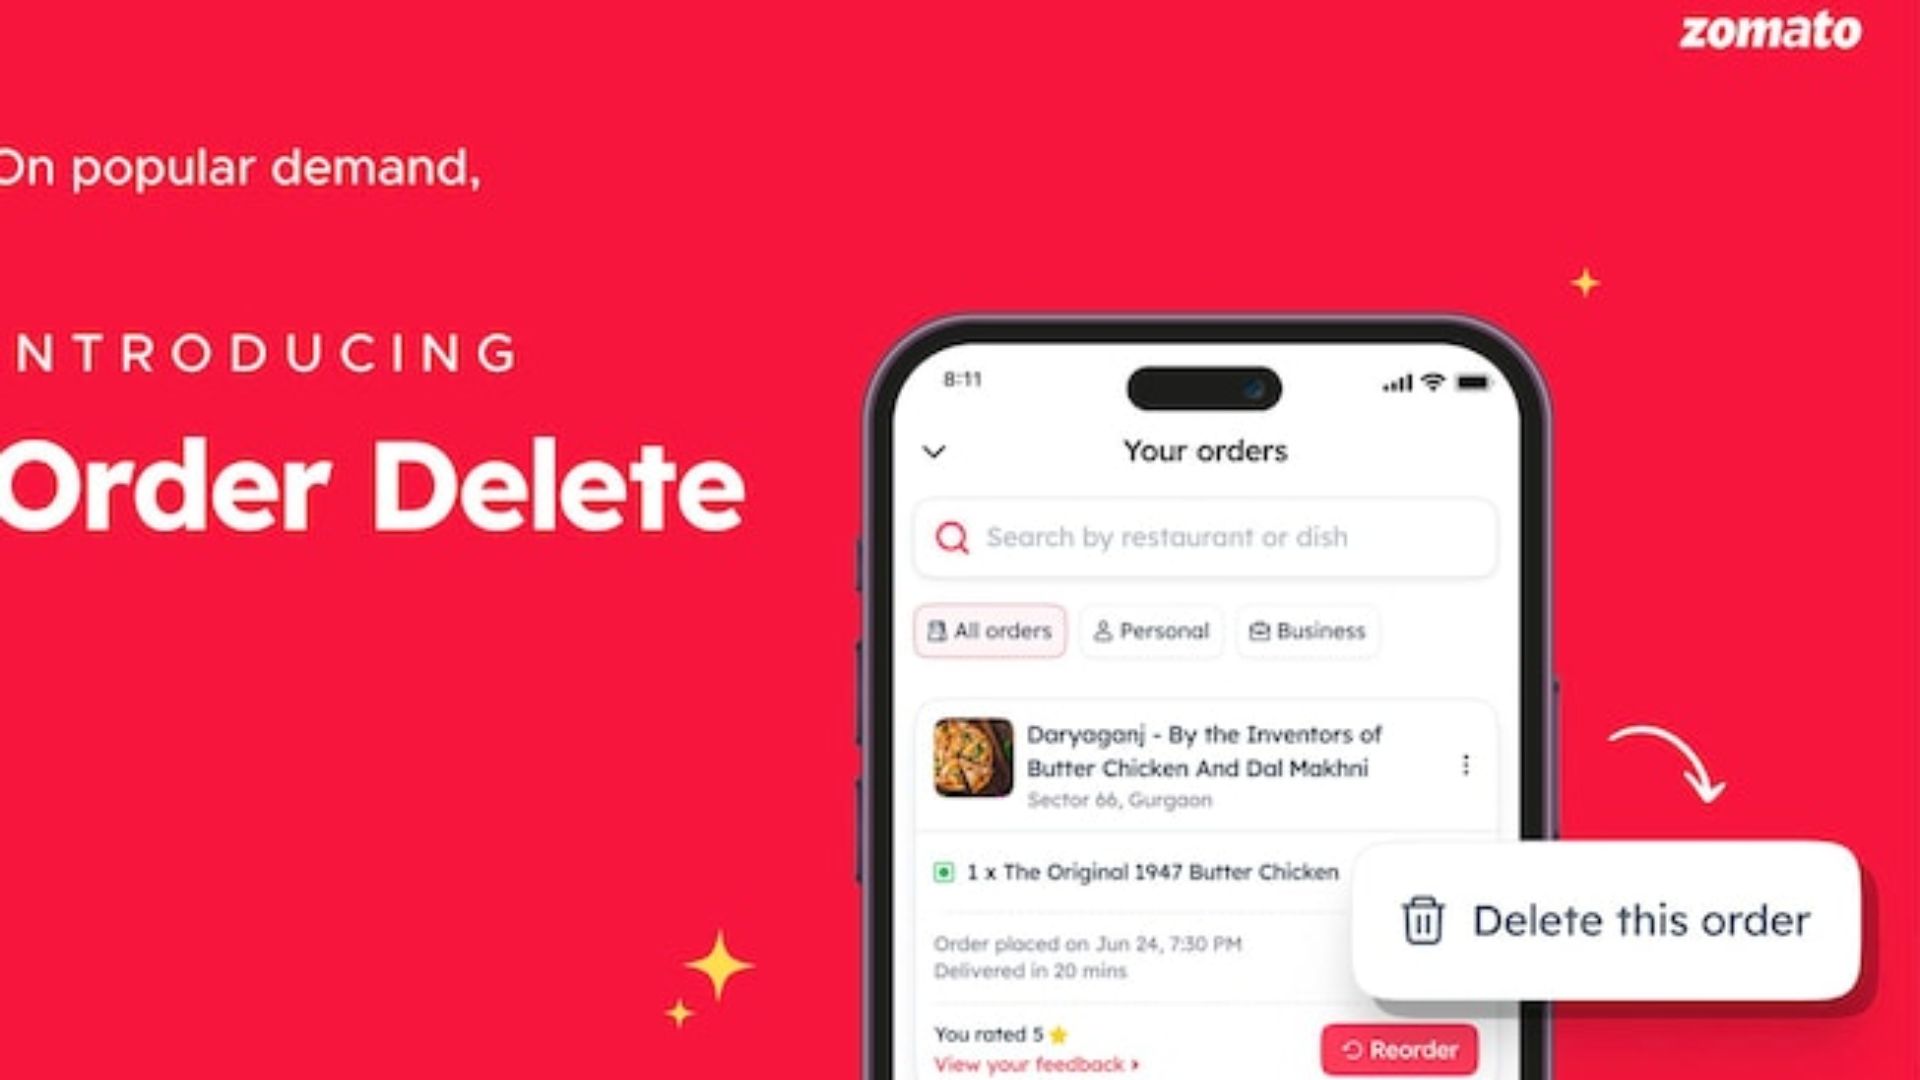 Zomato CEO Introduces Feature to Delete Order History, Netizens React